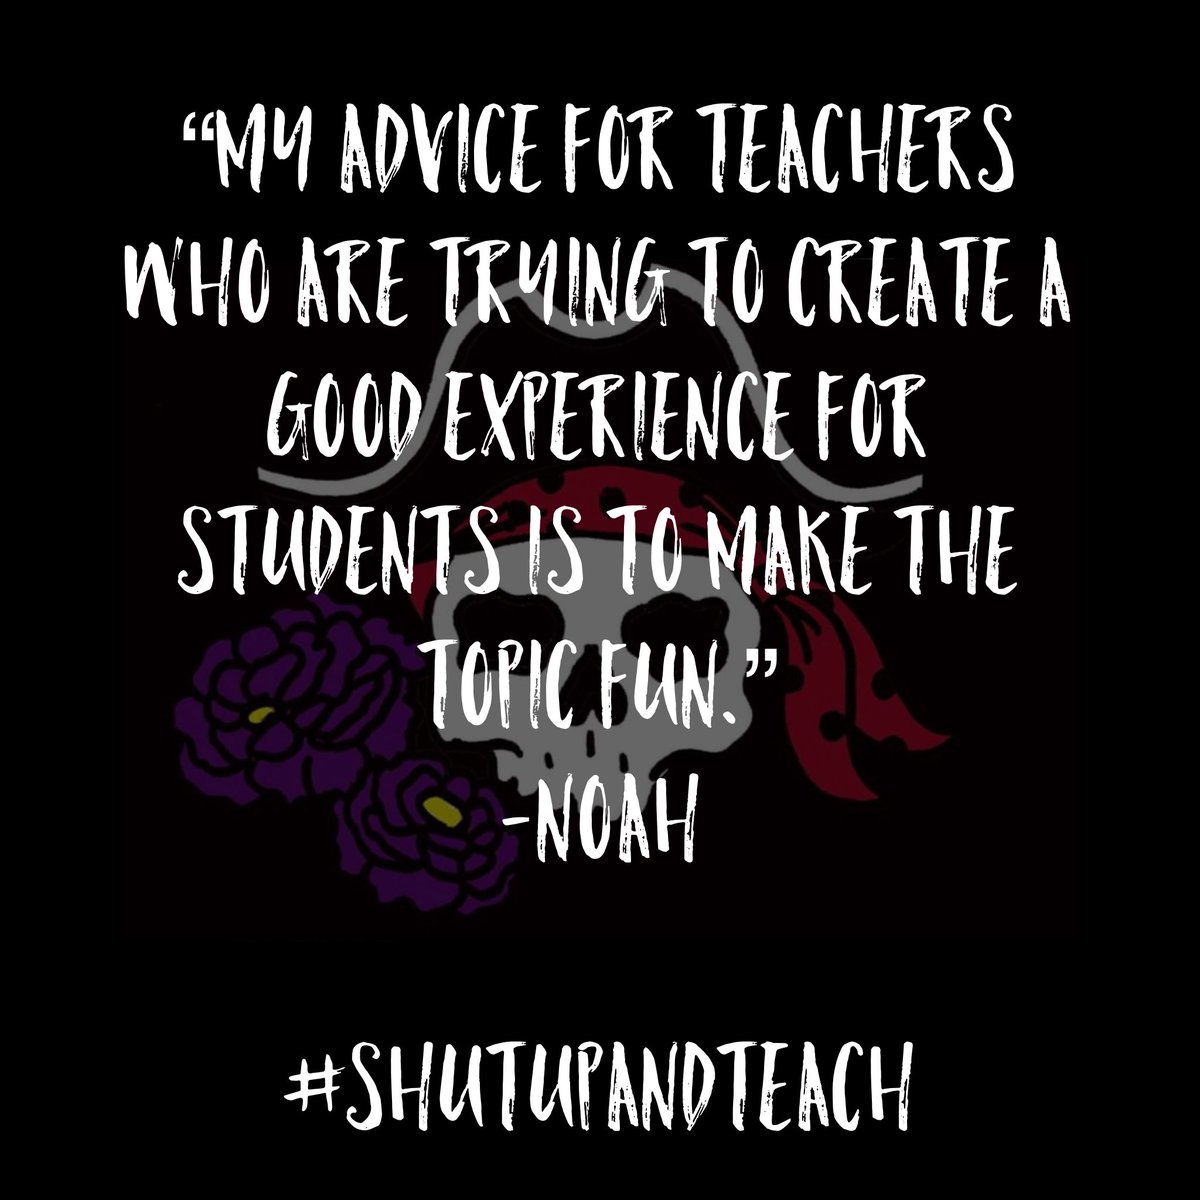 Two of my former #students contributed to my book #APlaceTheyLoveBook! Noah, an 8th grader now, shares some advice for #teachers. Let’s listen up!

#ShutUpAndTeach #EduMatch #EduMatchBooks #studentauthor #teacherauthor @EdumatchBooks @sarahdateechur @ClarissaD005 @schnekser